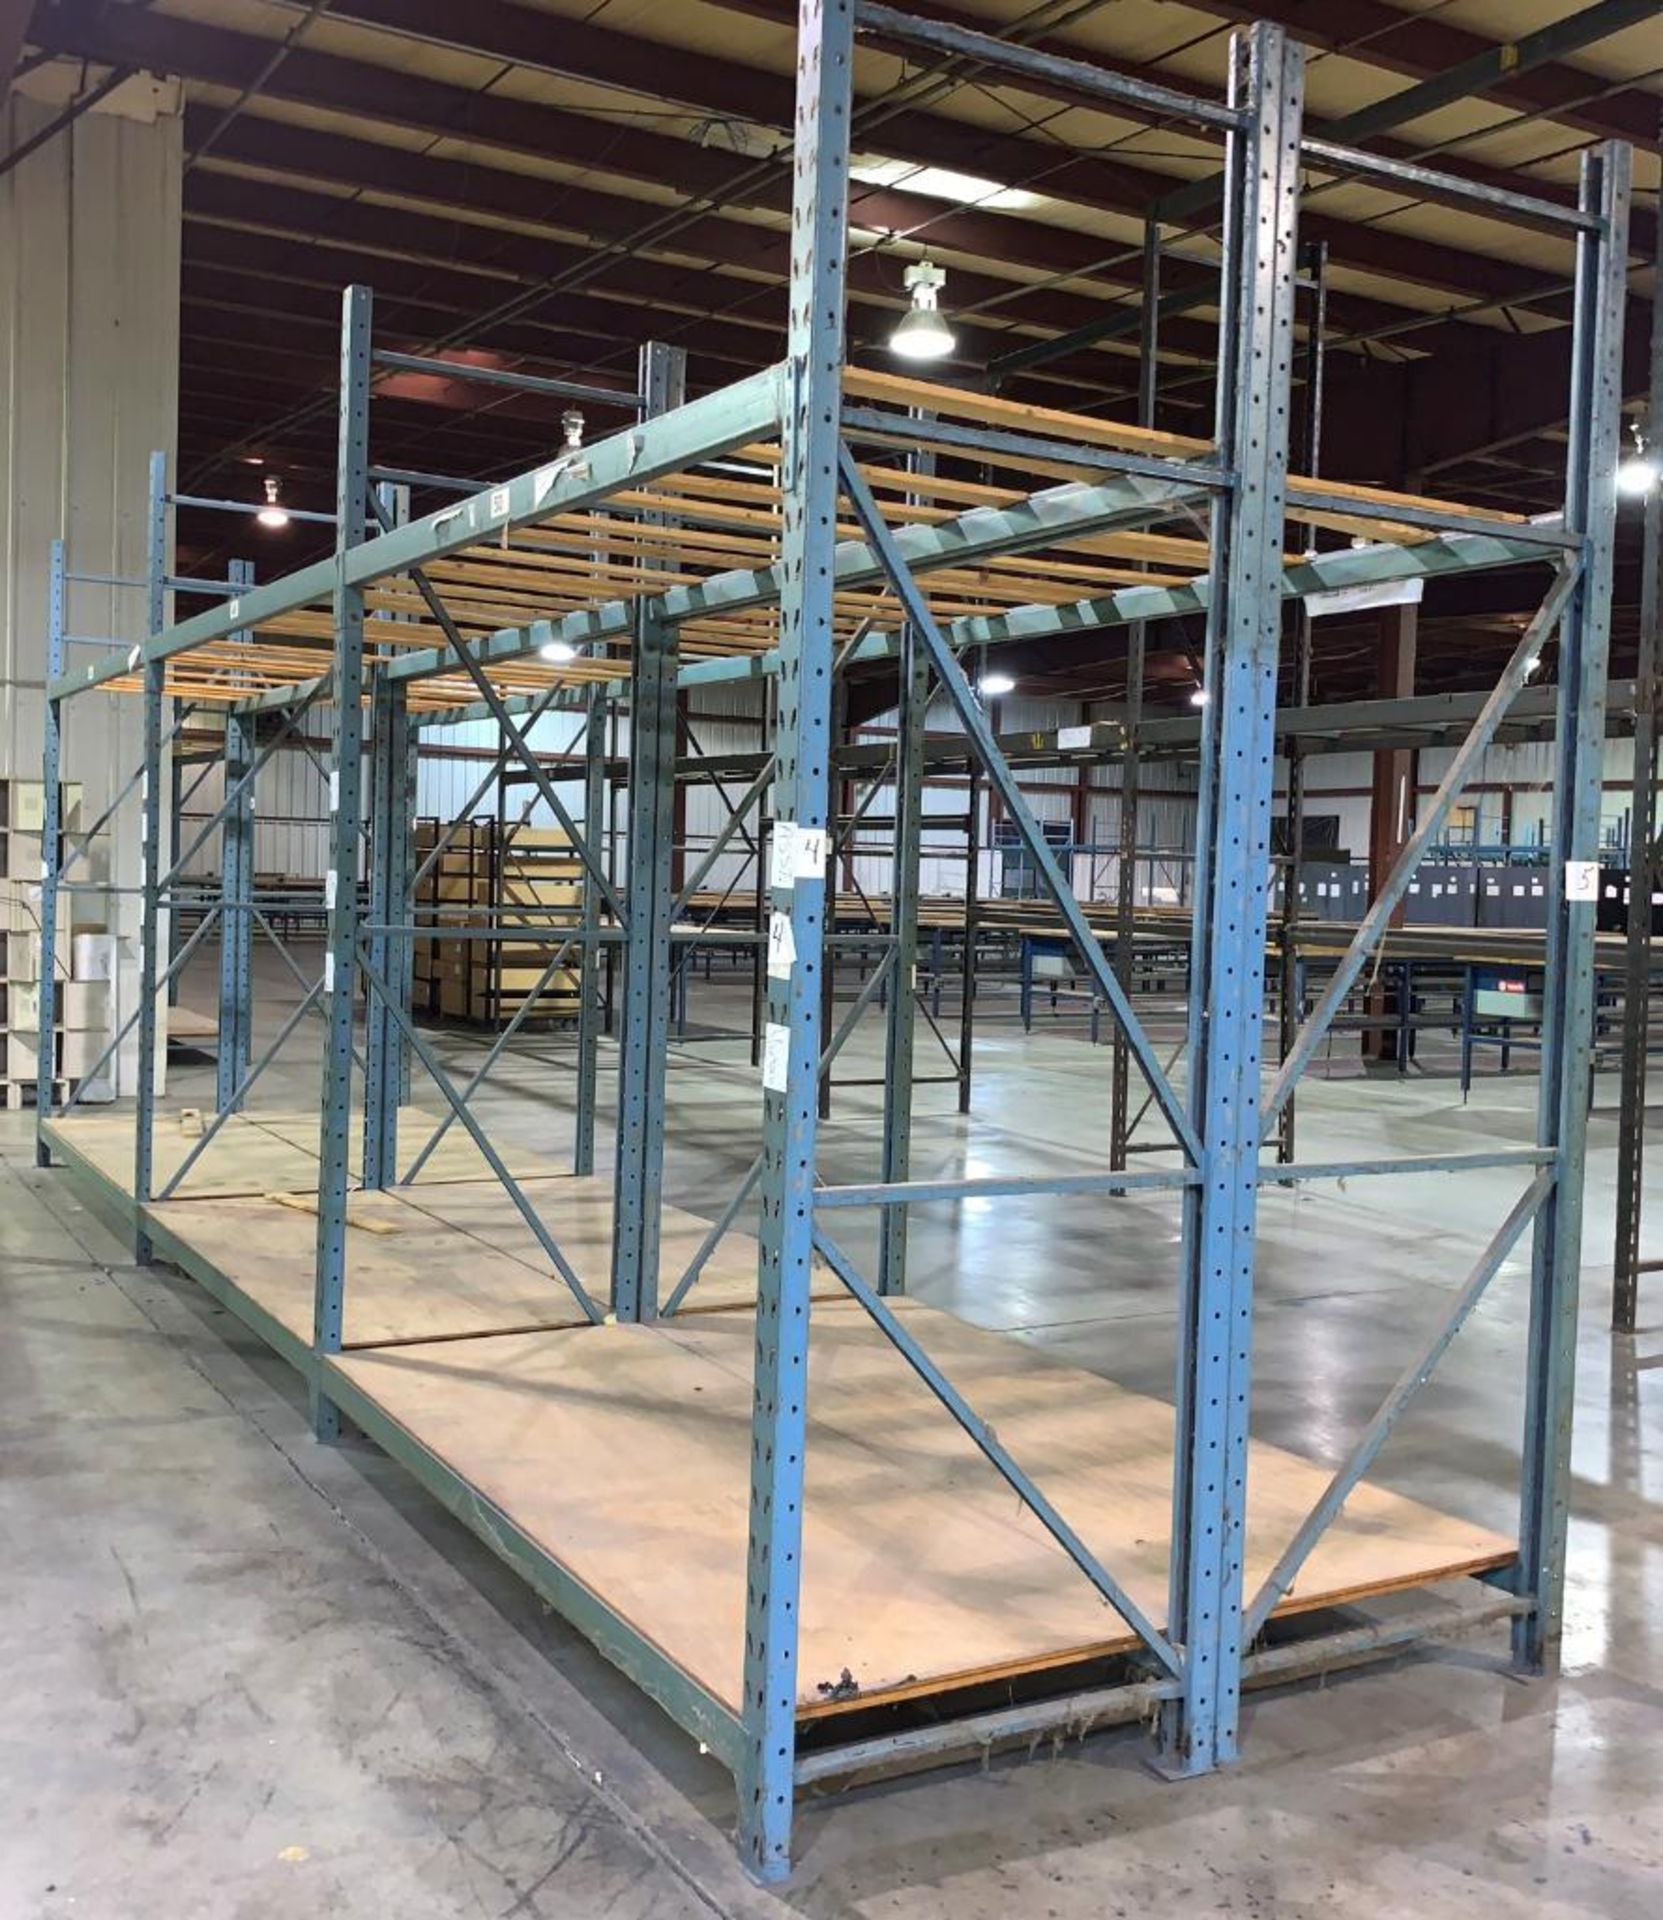 LOT: (6) Sections 8 ft. W x 4 ft. D x 10 ft H Pallet Rack (LOCATED IN MT. VERNON, IL) - Image 2 of 2